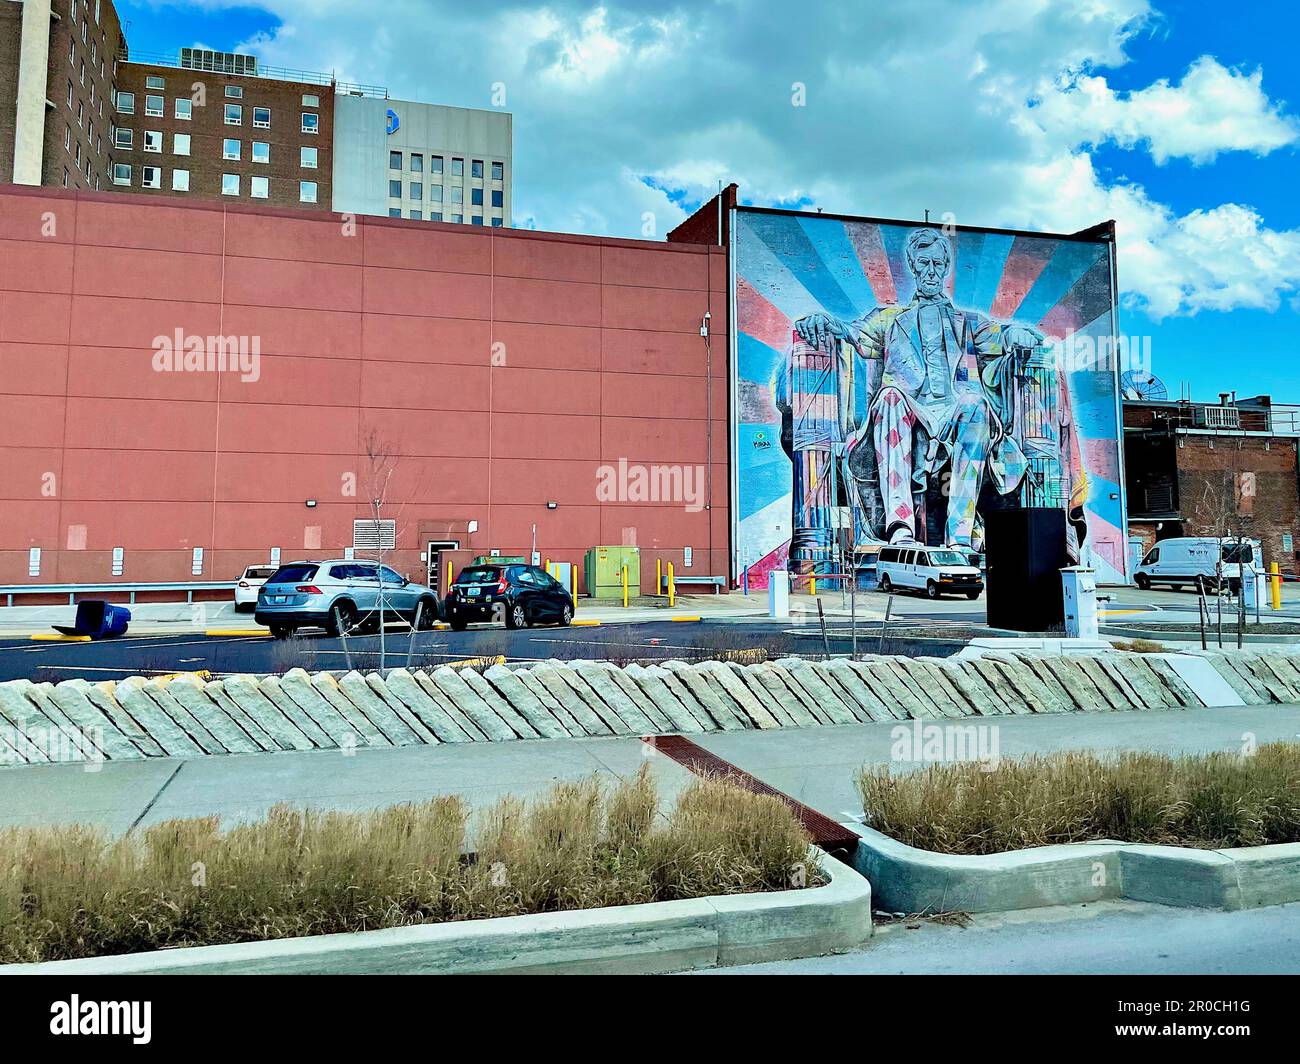 A large painting honoring Abraham Lincoln adorns the entire side of a building in downtown Lexington, Kentucky, seen here on a sunny afternoon. Stock Photo